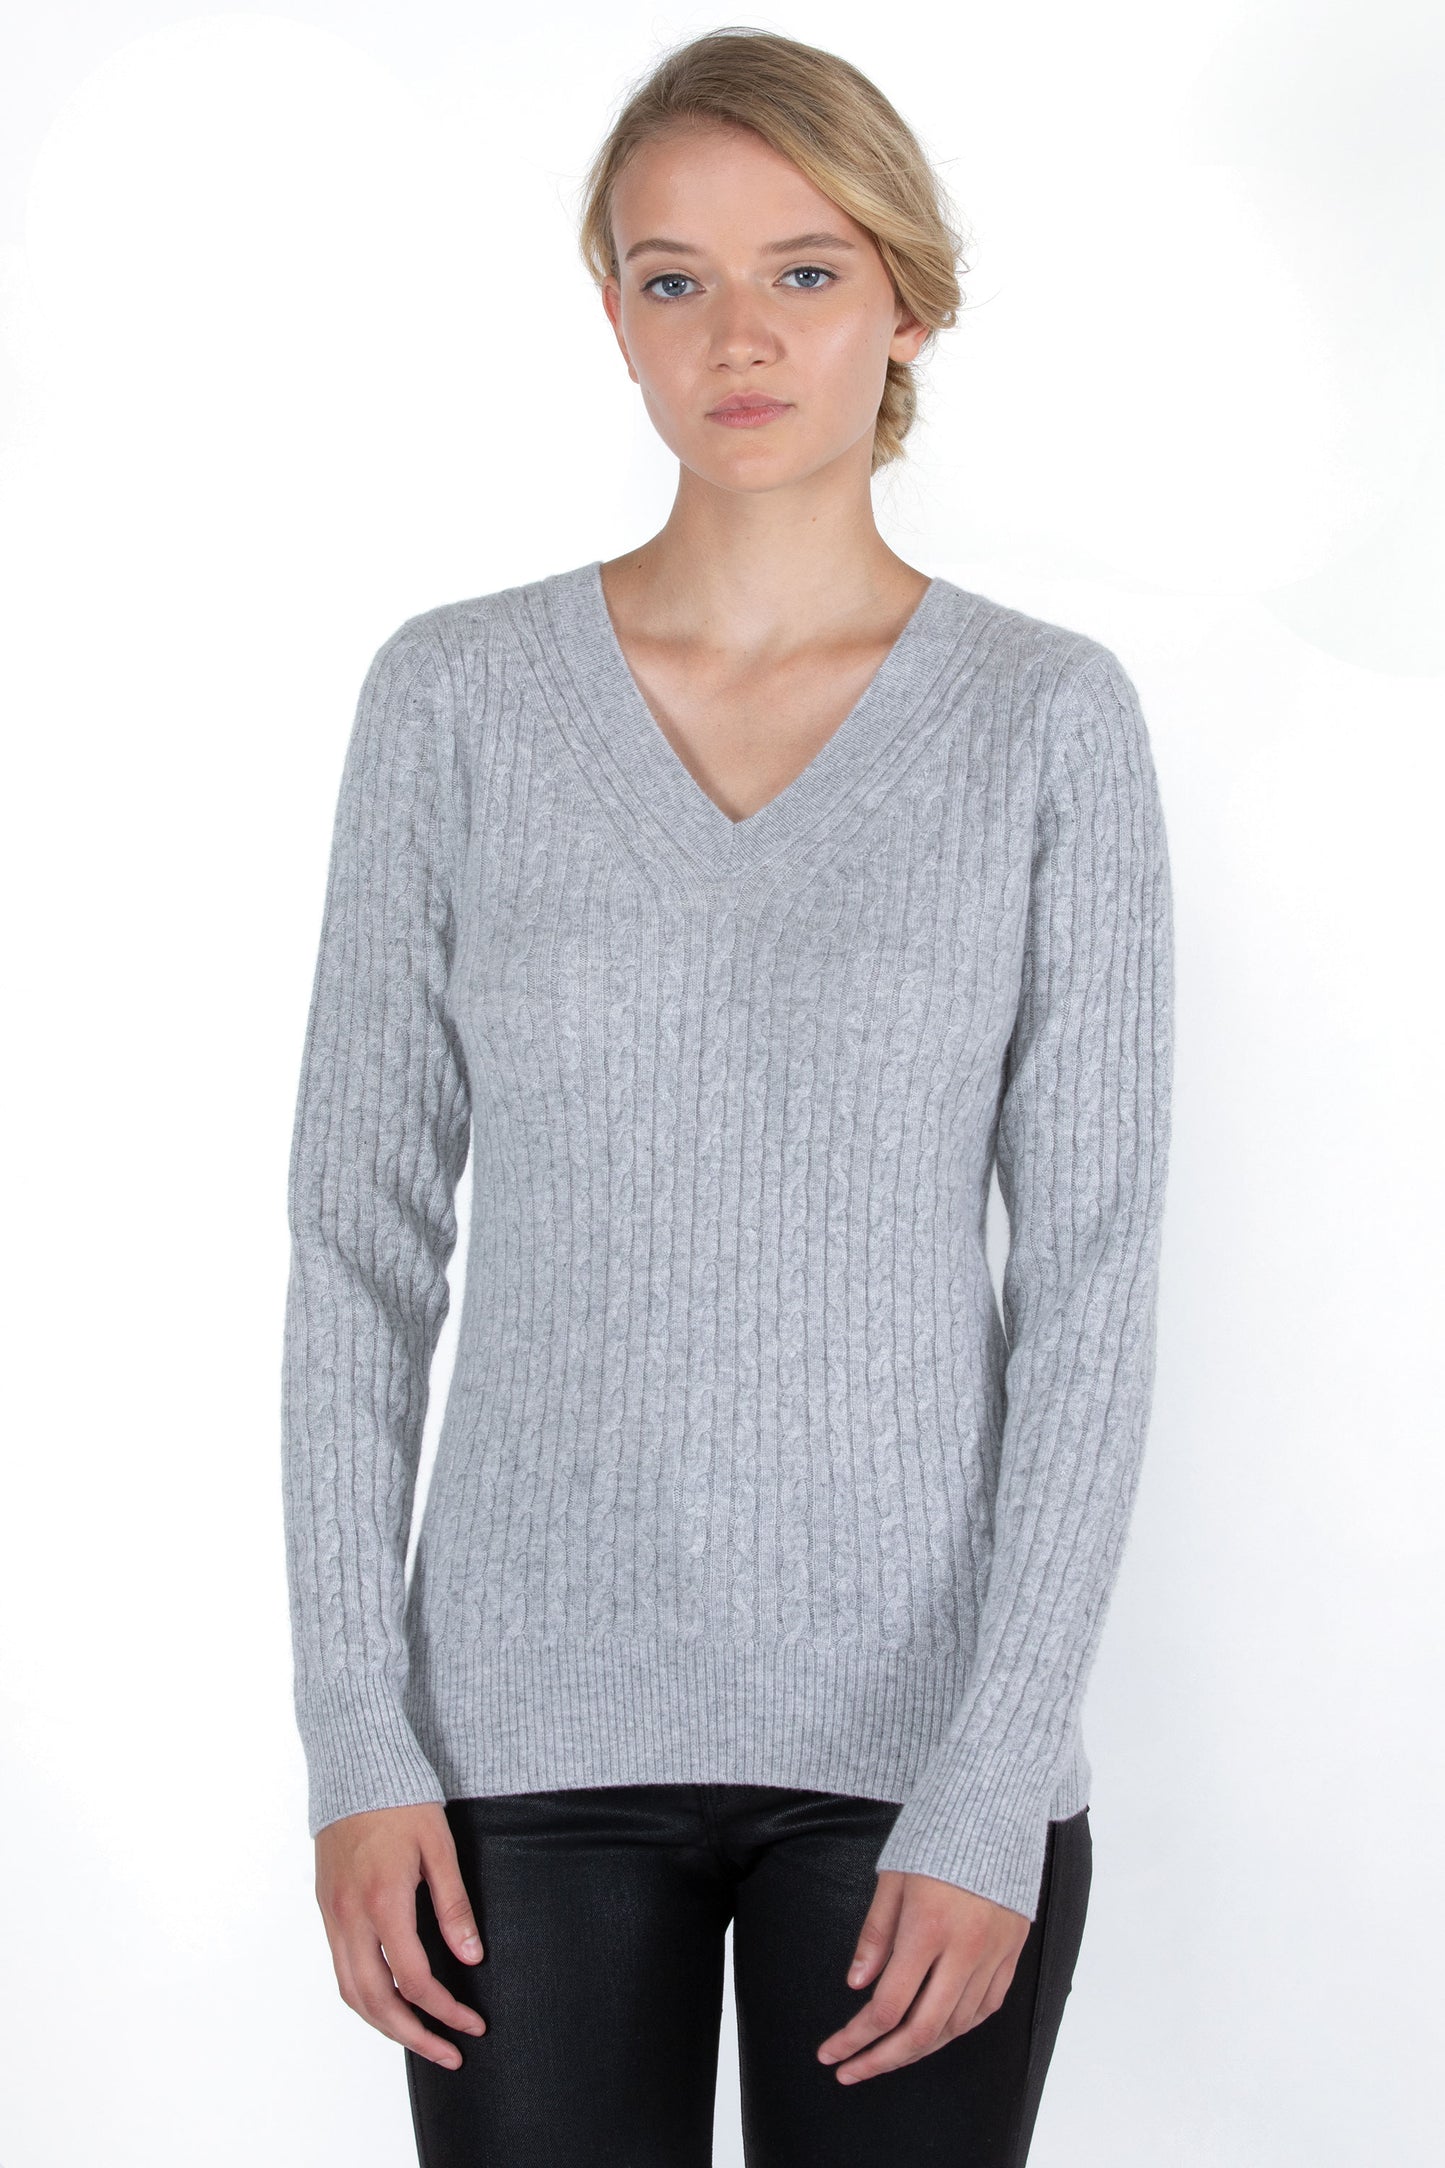 J CASHMERE By JENNIE LIU Women's 100% Cashmere Long Sleeve Pullover Cable-knit V-neck Sweater